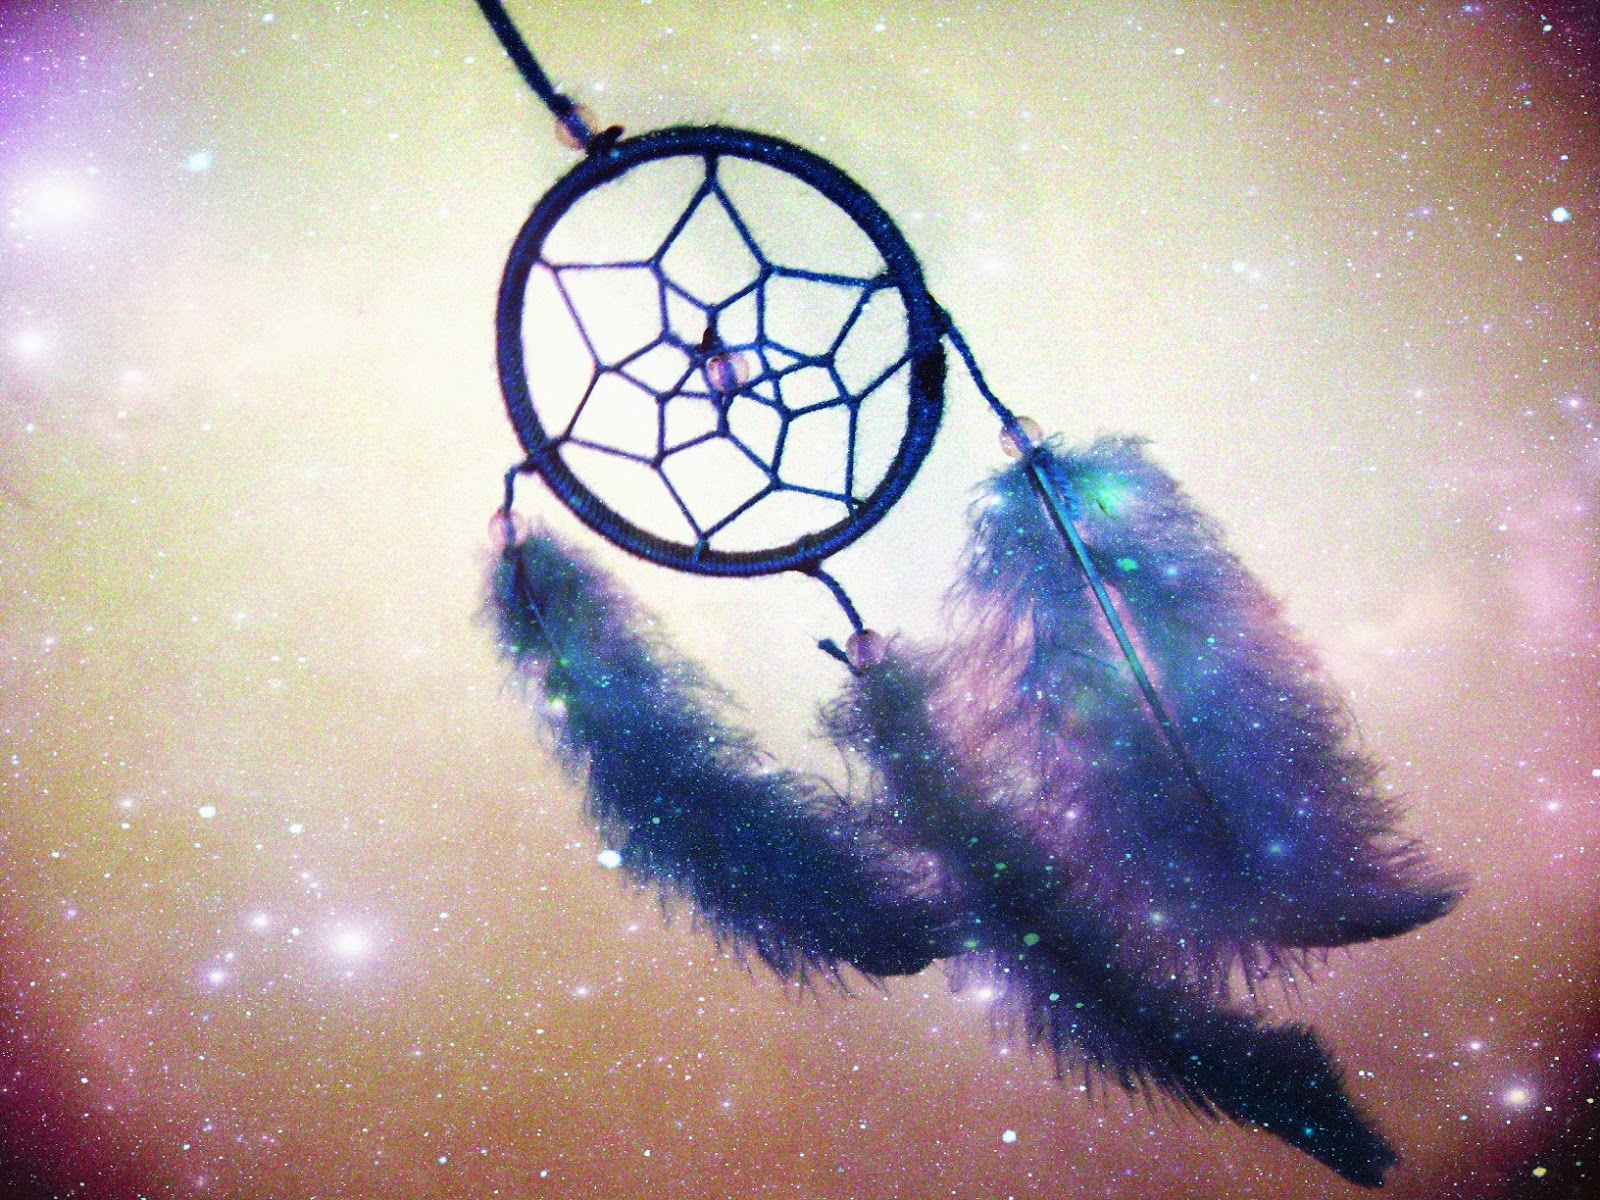  dreamcatcher wallpapers HD You can take it as background